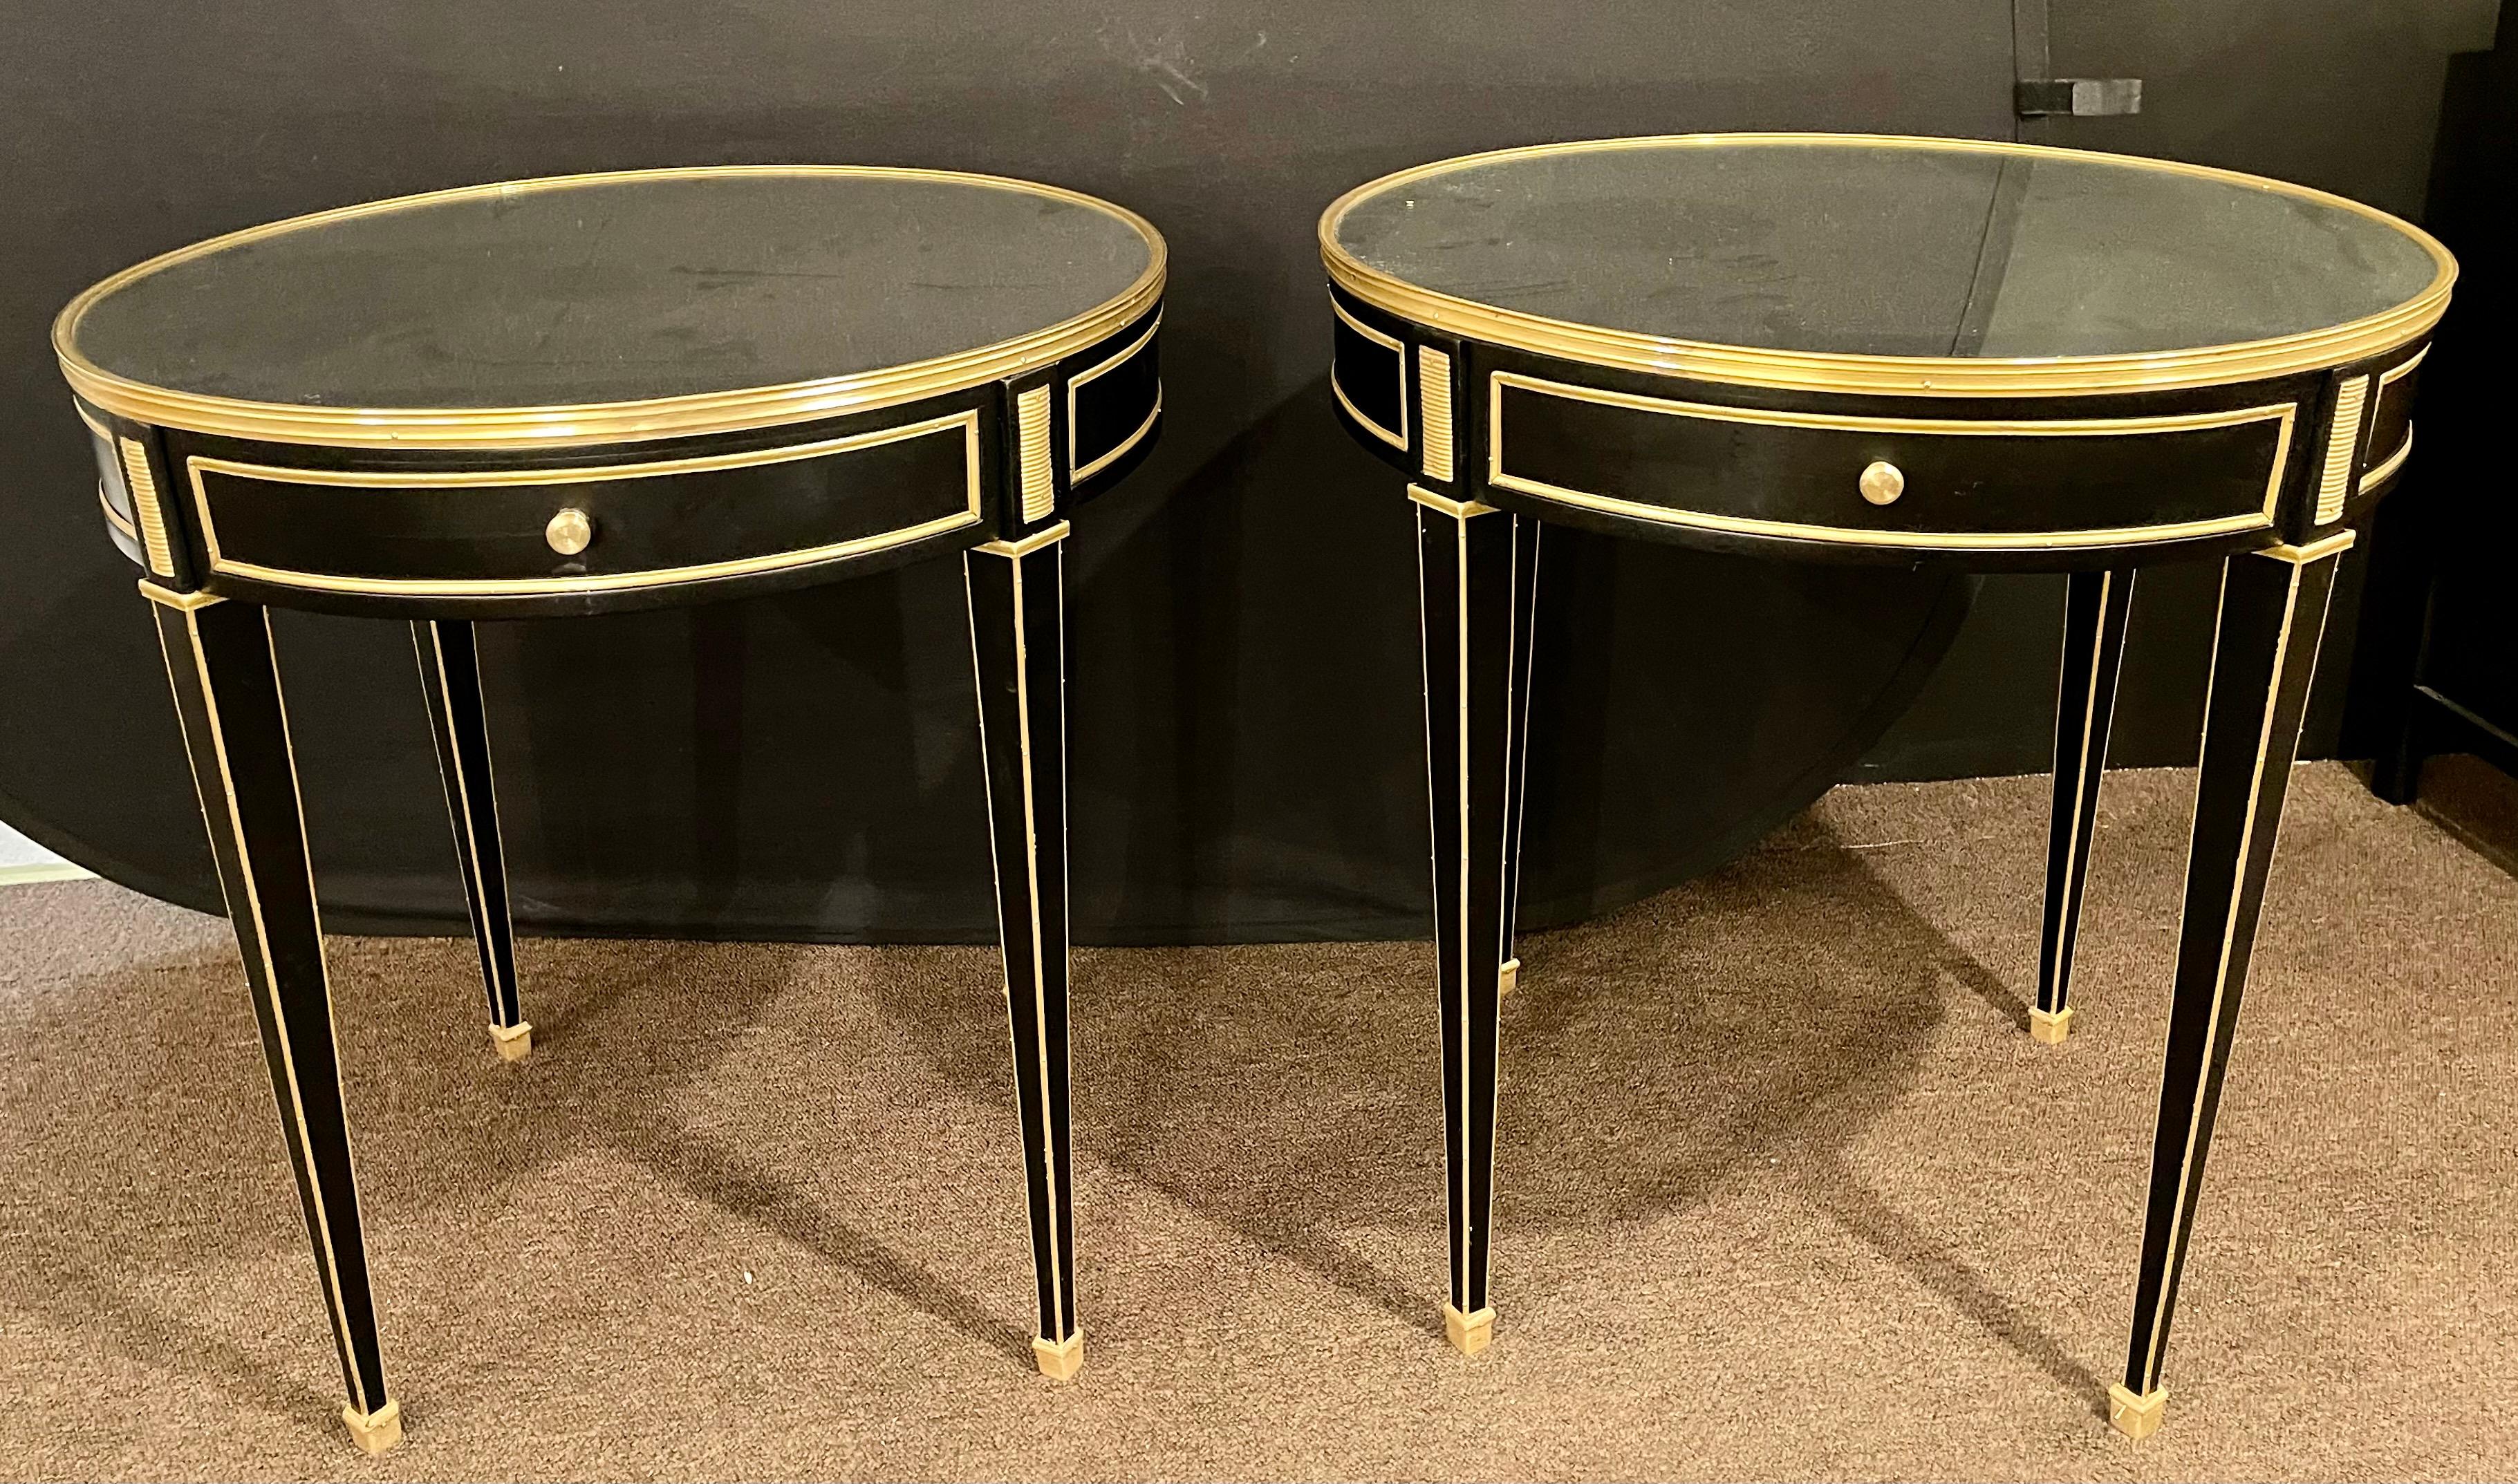 A pair of Jansen style Louis XVI fashioned end or gueridon tables. Each having a bronze framed mirrored top sitting on a single drawer bronzed framed apron with cookie cutter corners. The whole having long sleek tapering legs with bronze framed